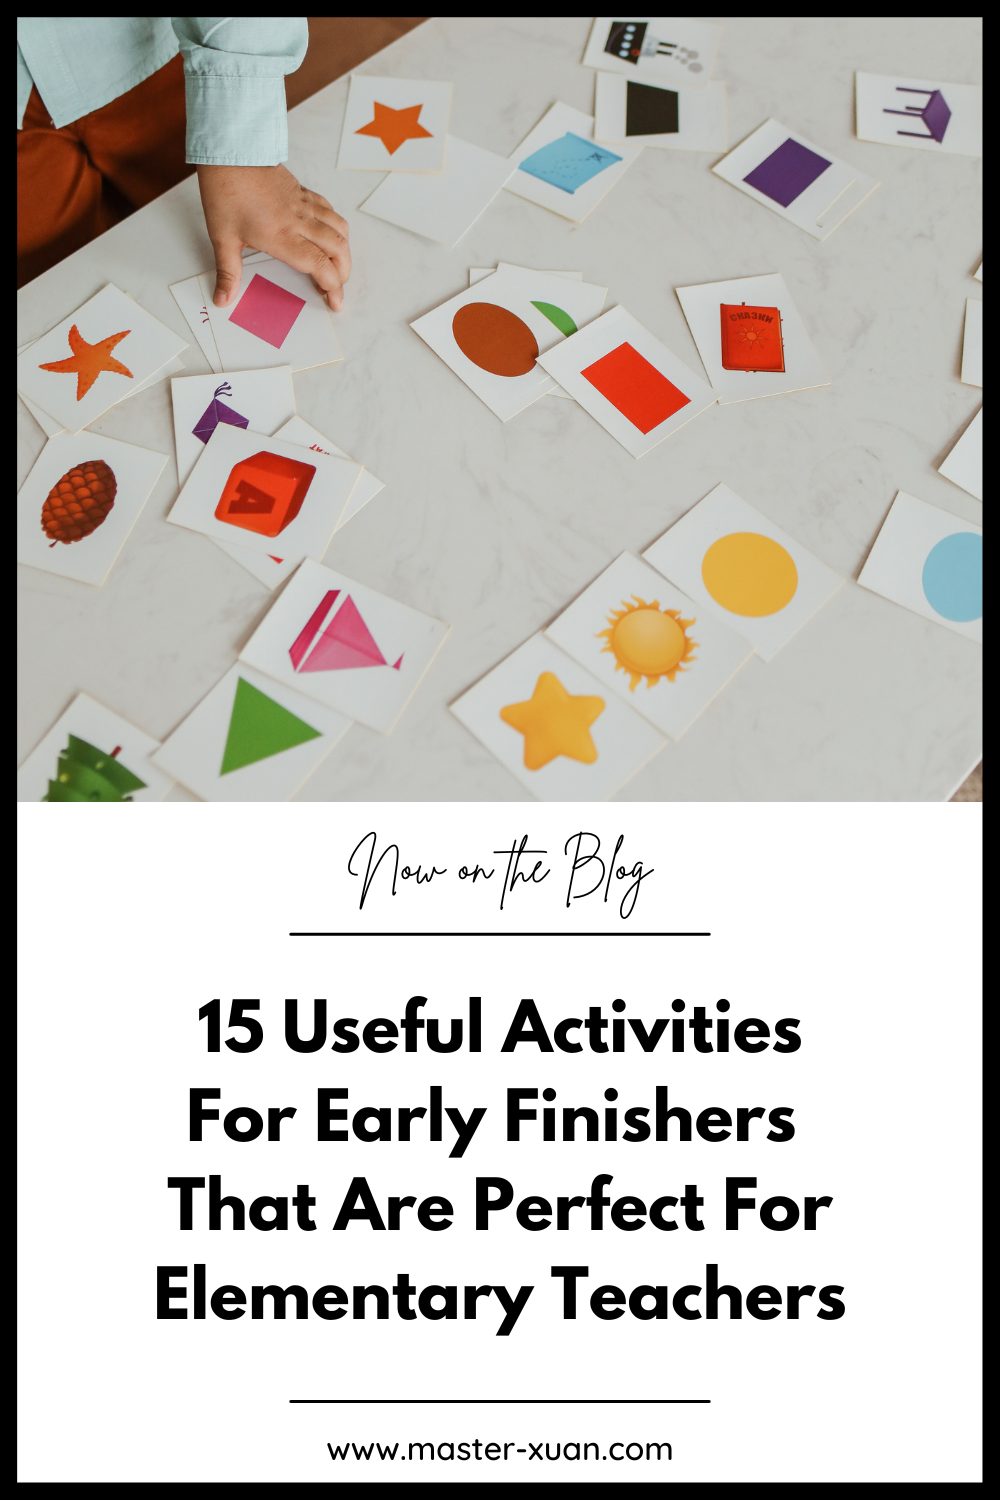 15 useful activities for early finishers